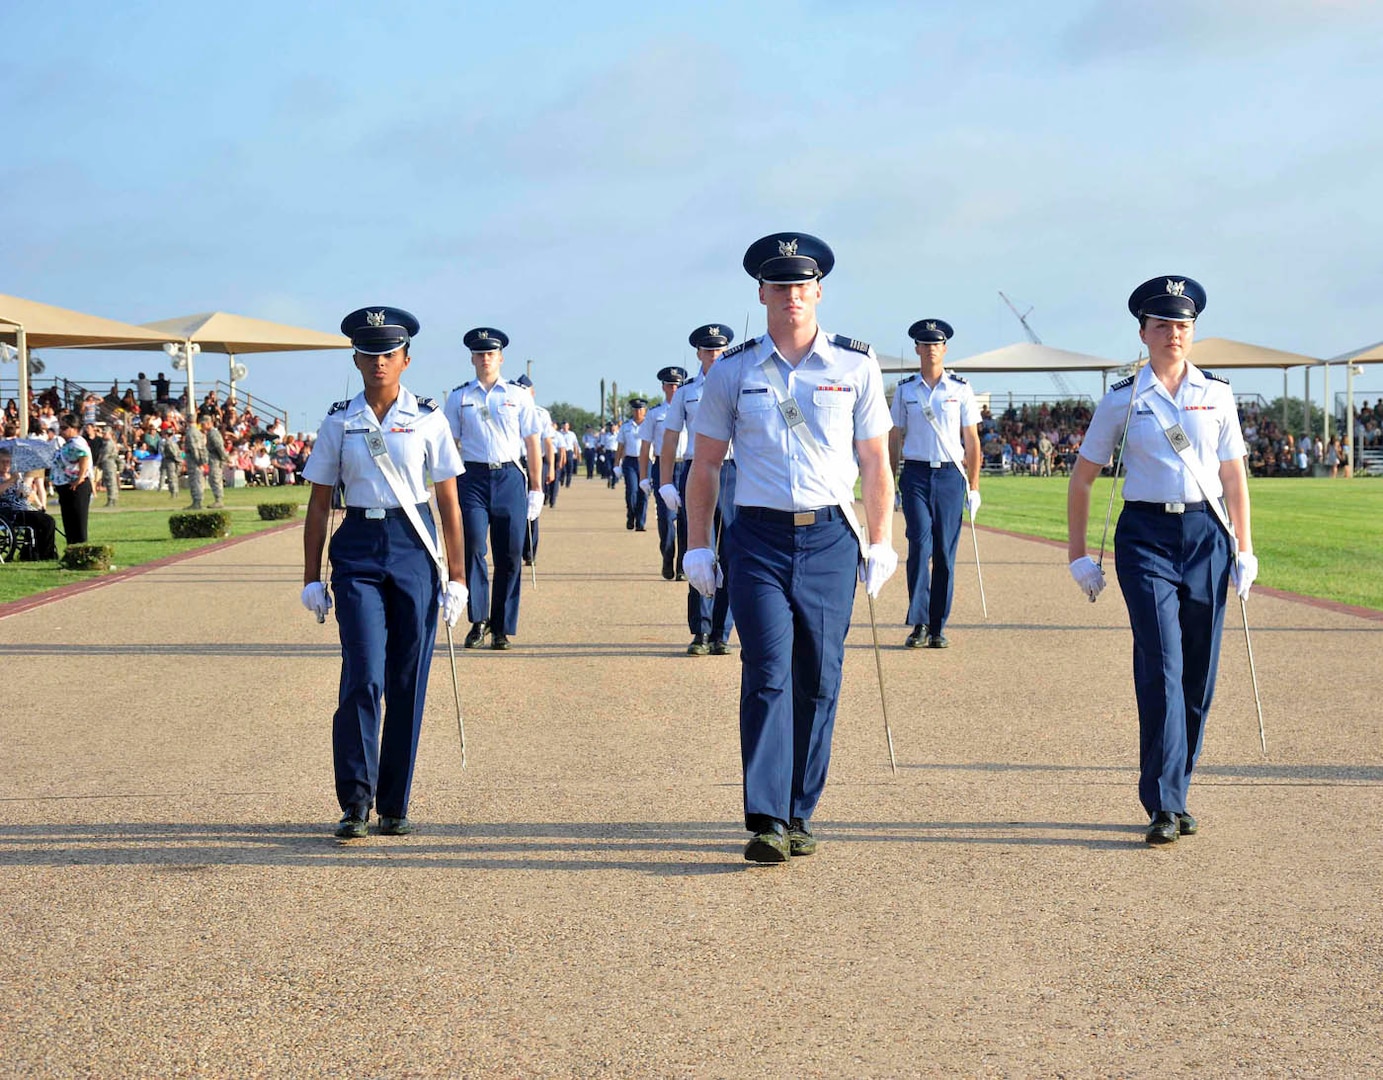 From left to right, U.S. Air Force Academy Cadet 2nd Class Nicque Robinson, Commander of Airmen Cadet 1st Class Joshua Hall, and Cadet 1st Class Christina Beckett lead the formation during practice just prior to the Air Force Basic Military Training graduation ceremony July 13 at the BMT parade grounds. Twenty-seven cadets from the academy’s current junior class shadowed military training instructors as part of the Cadet Summer Leadership Program. The seven-week visit culminated with cadets leading key positions during the BMT graduation ceremony. (U.S. Air Force photo/Alan Boedeker)